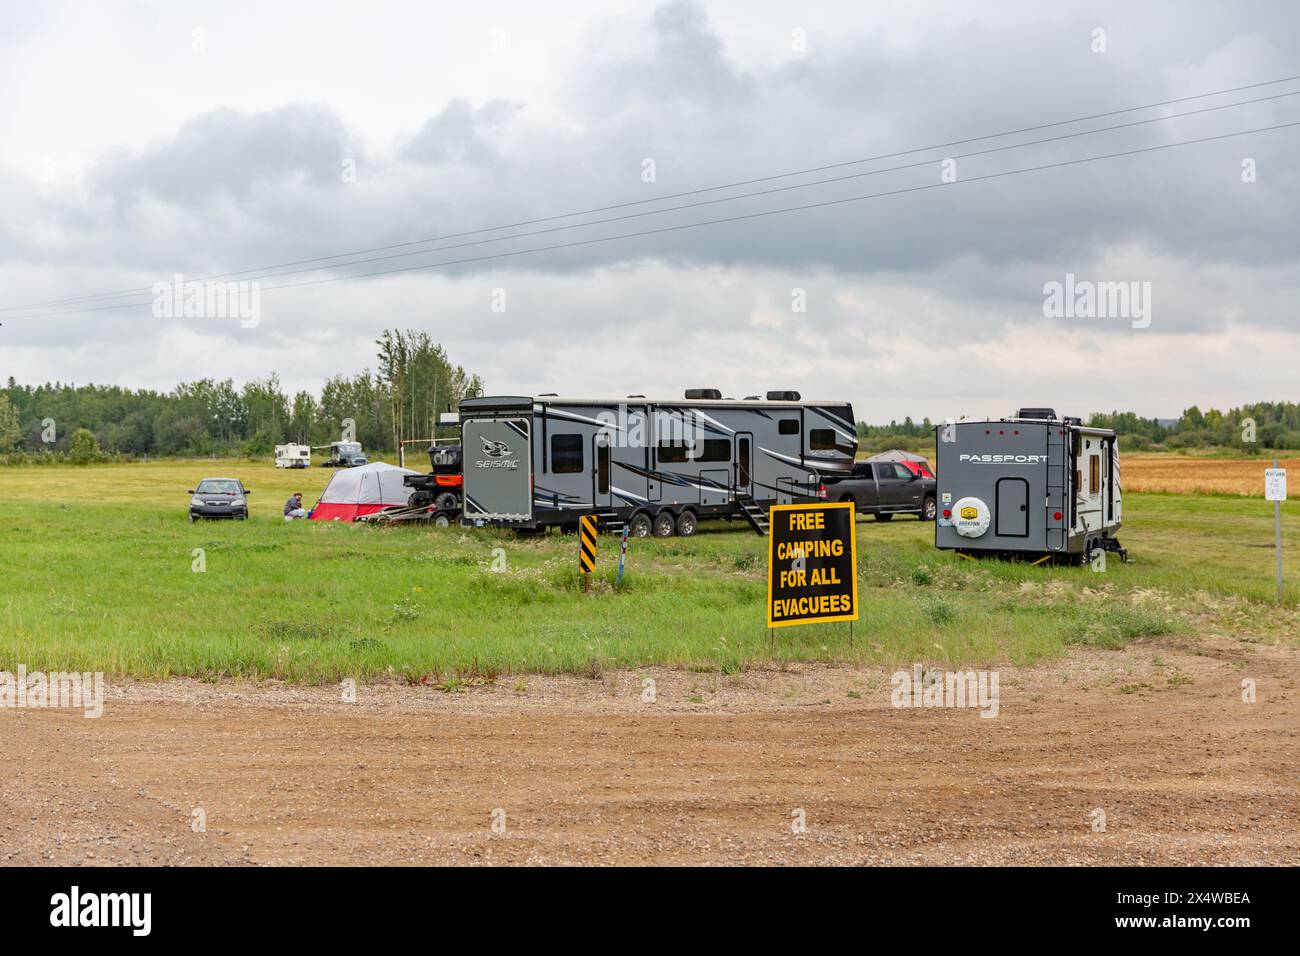 RVs parked at free camping area set up in High Level, Alberta for Northwest Territories wildfire evacuees. Over 4 million hectares of forest burned. Stock Photo